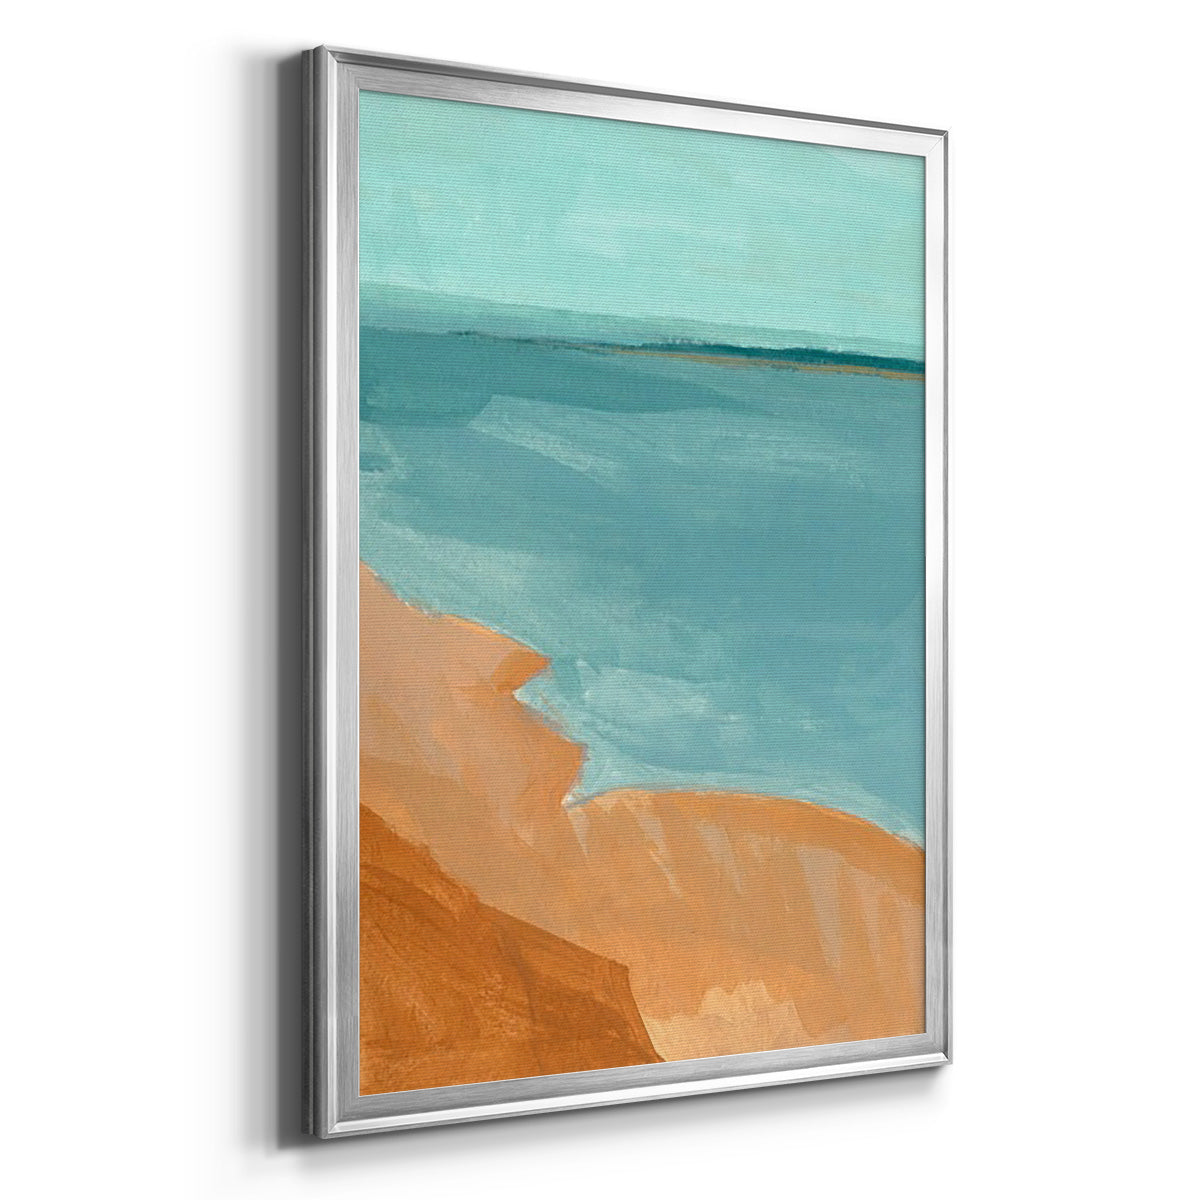 Out on the Sandbar II Premium Framed Print - Ready to Hang